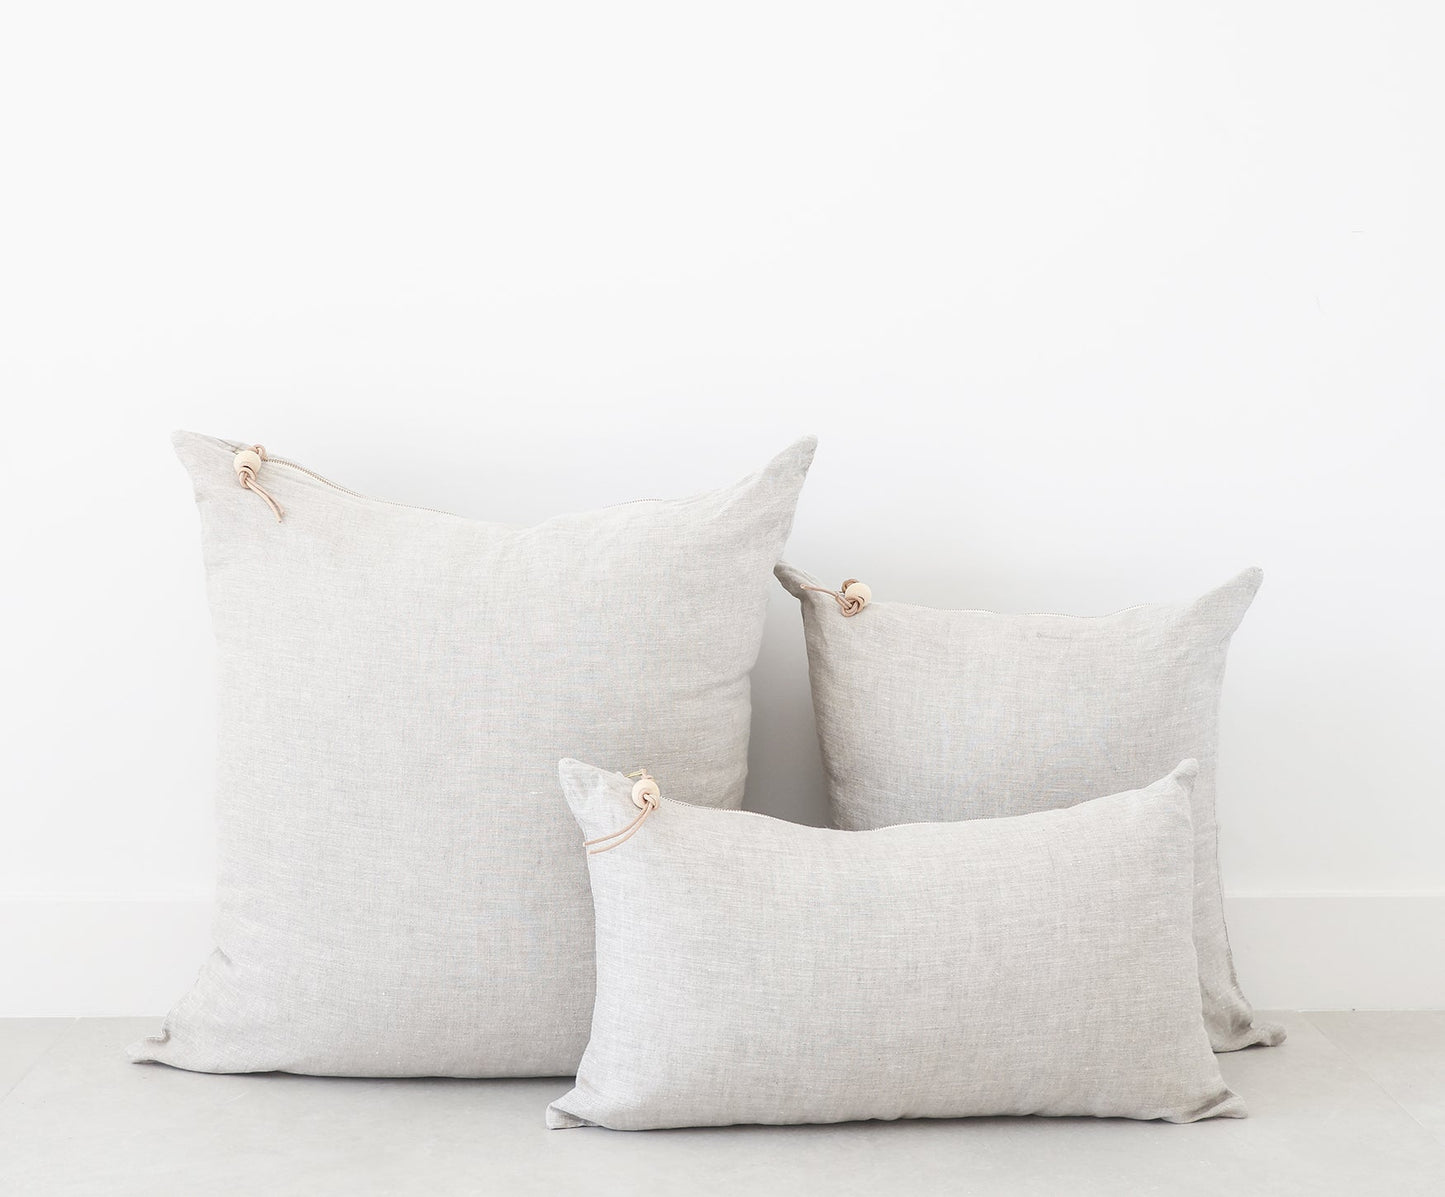 Oatmeal Washed Linen Pillow - celina mancurti - pillow - 20 X 20 inches -Cover ONLY -Oatmeal Linen